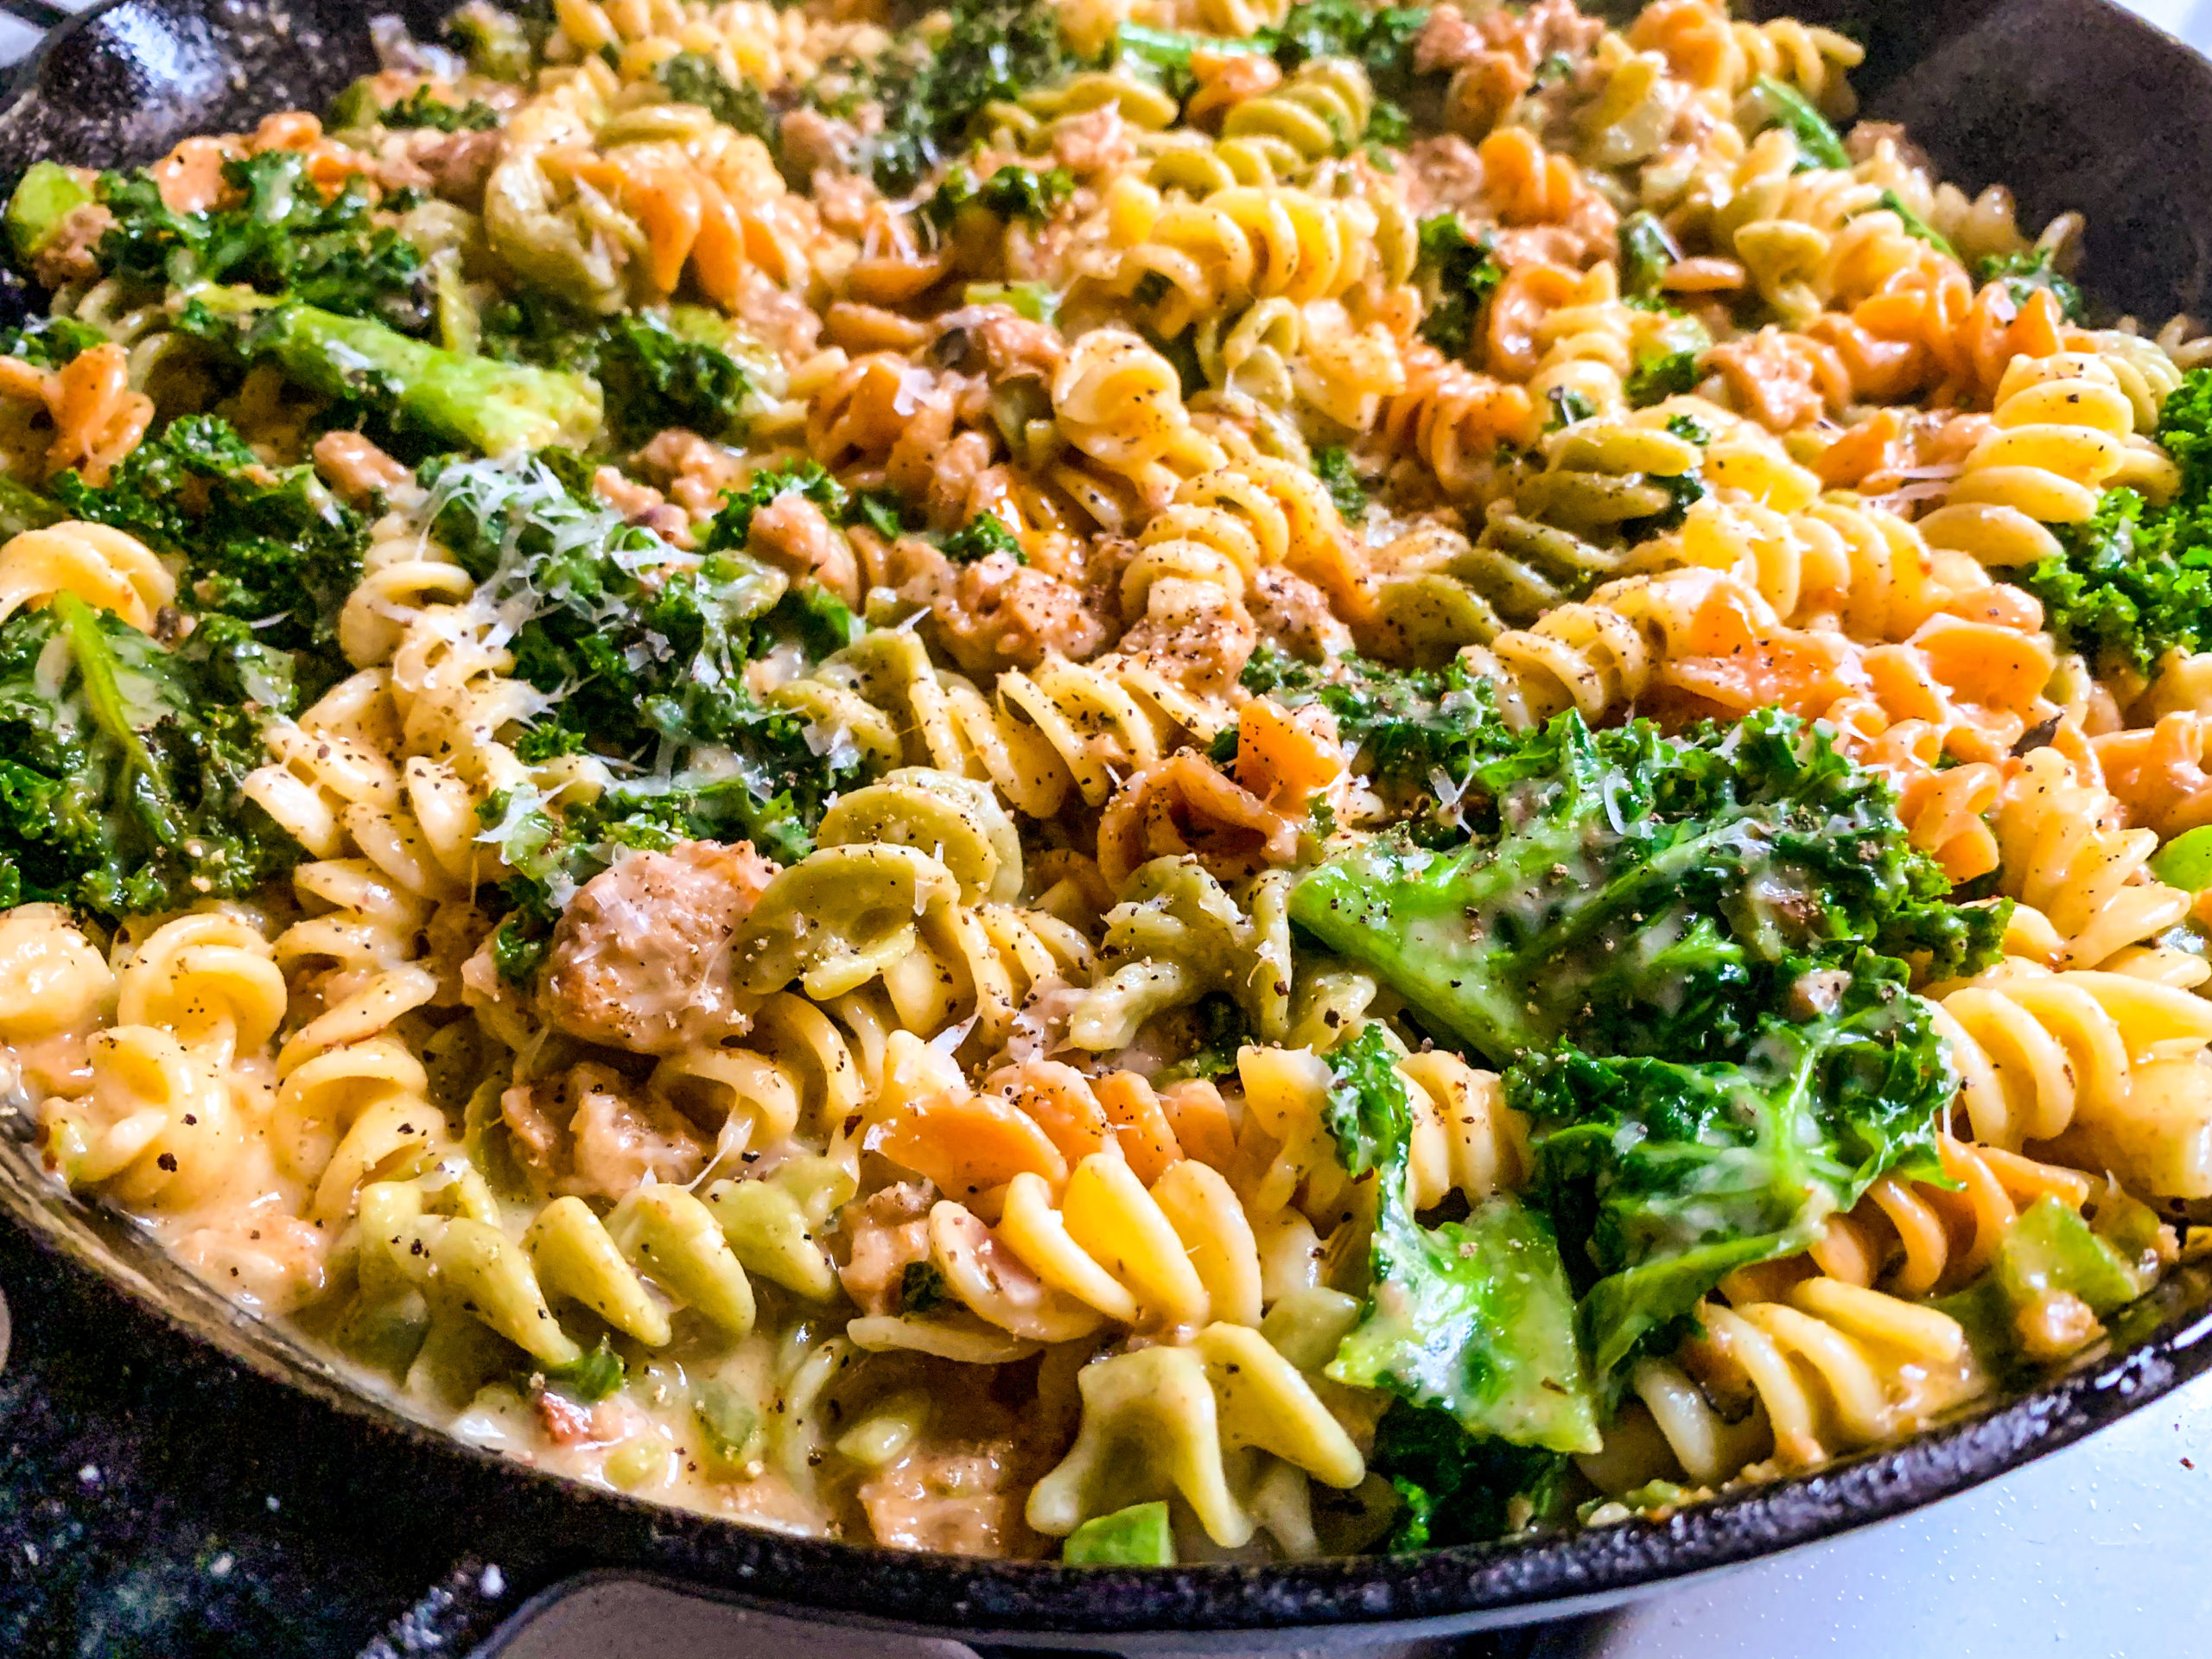 Recipe Review: Creamy Cajun Pasta with Chicken and Andouille Sausage